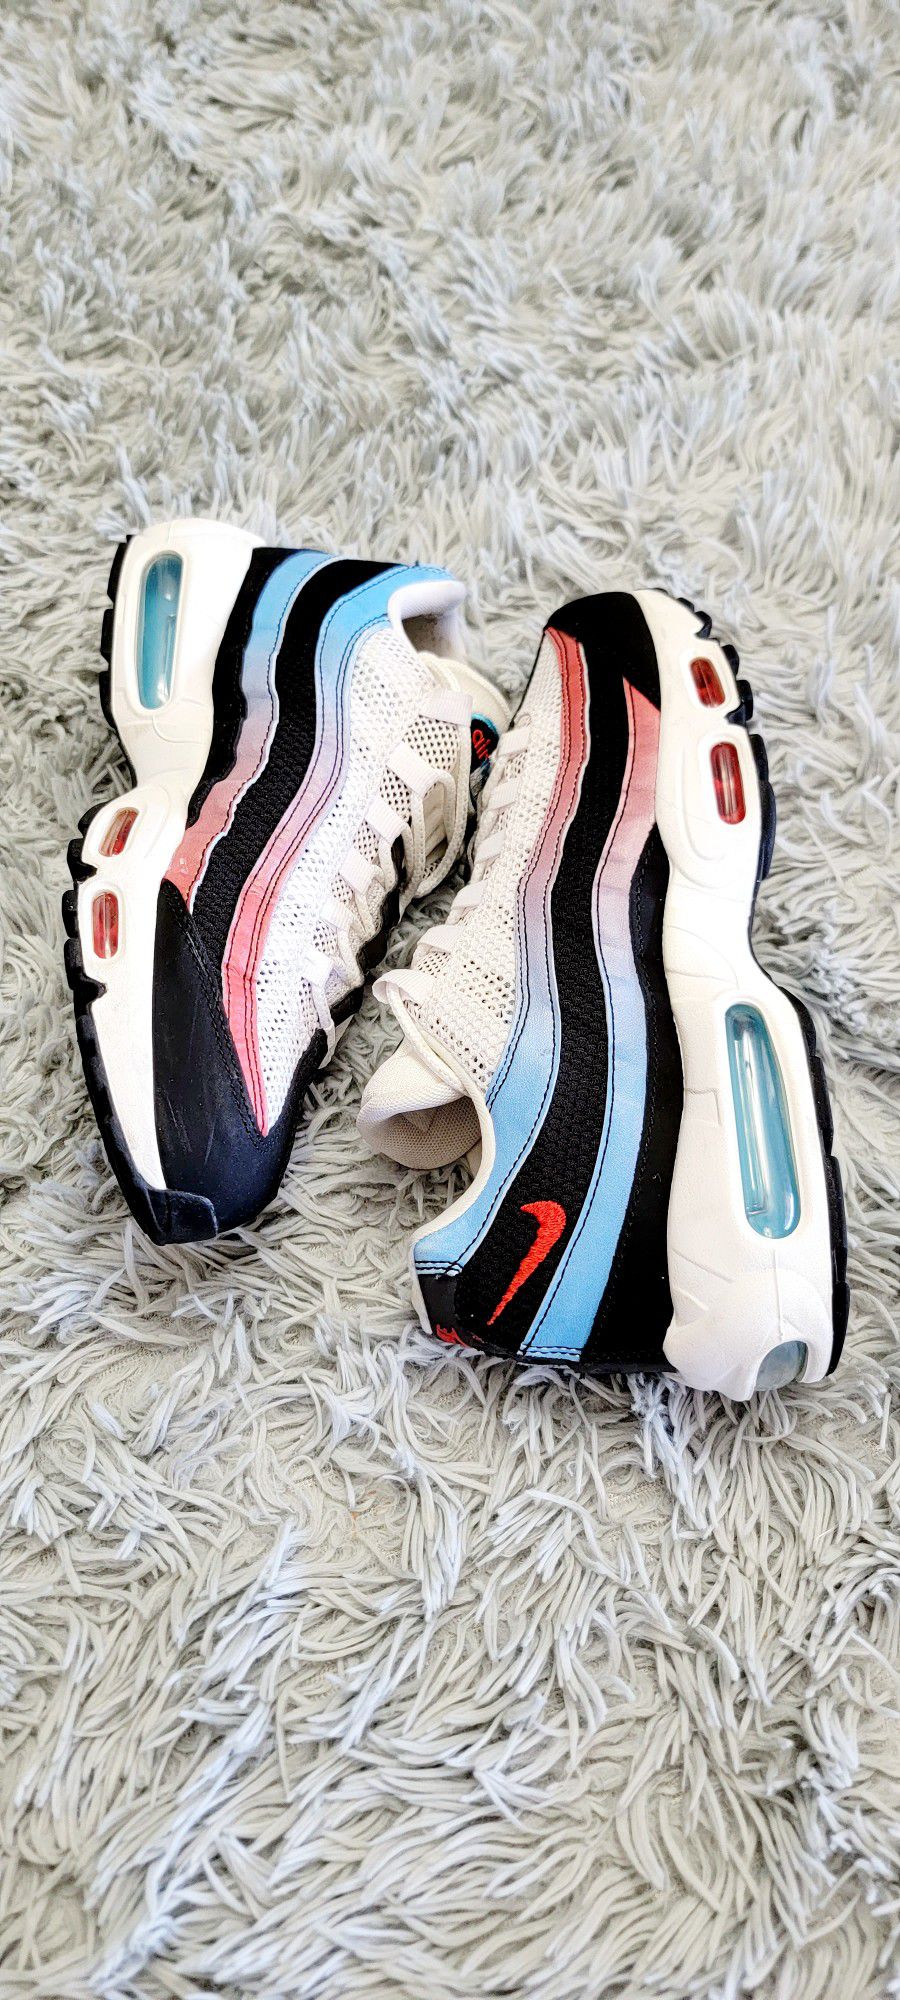 Size 8 Nike Air Max 95 Blue Red Gradient CK0037-001.
